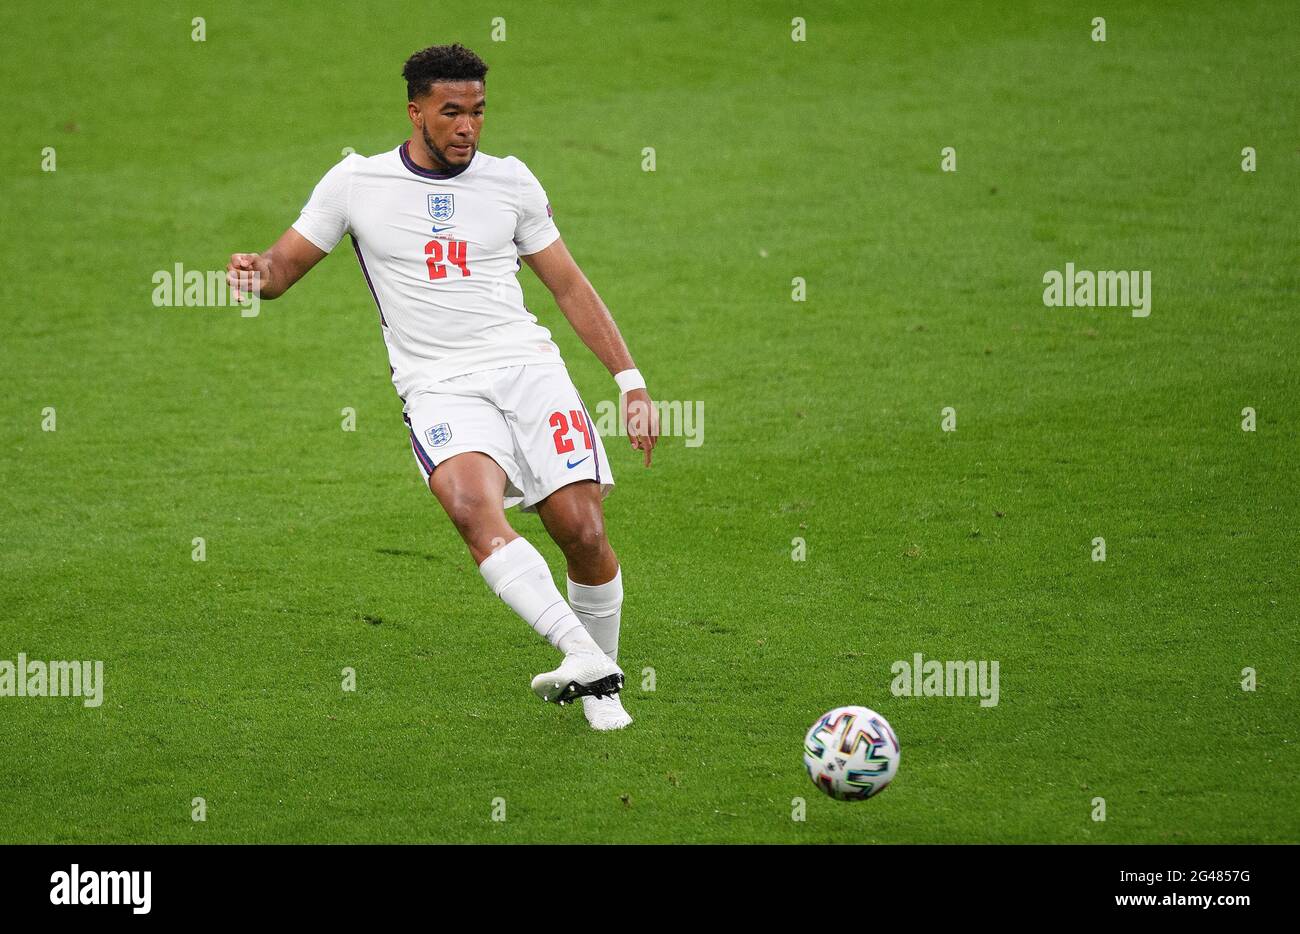 18th June 2021 - England v Scotland - UEFA Euro 2020 Group D Match - Wembley - London  England's Reece James during the Euro 2020 match against Scotland. Picture Credit : © Mark Pain / Alamy Live News Stock Photo